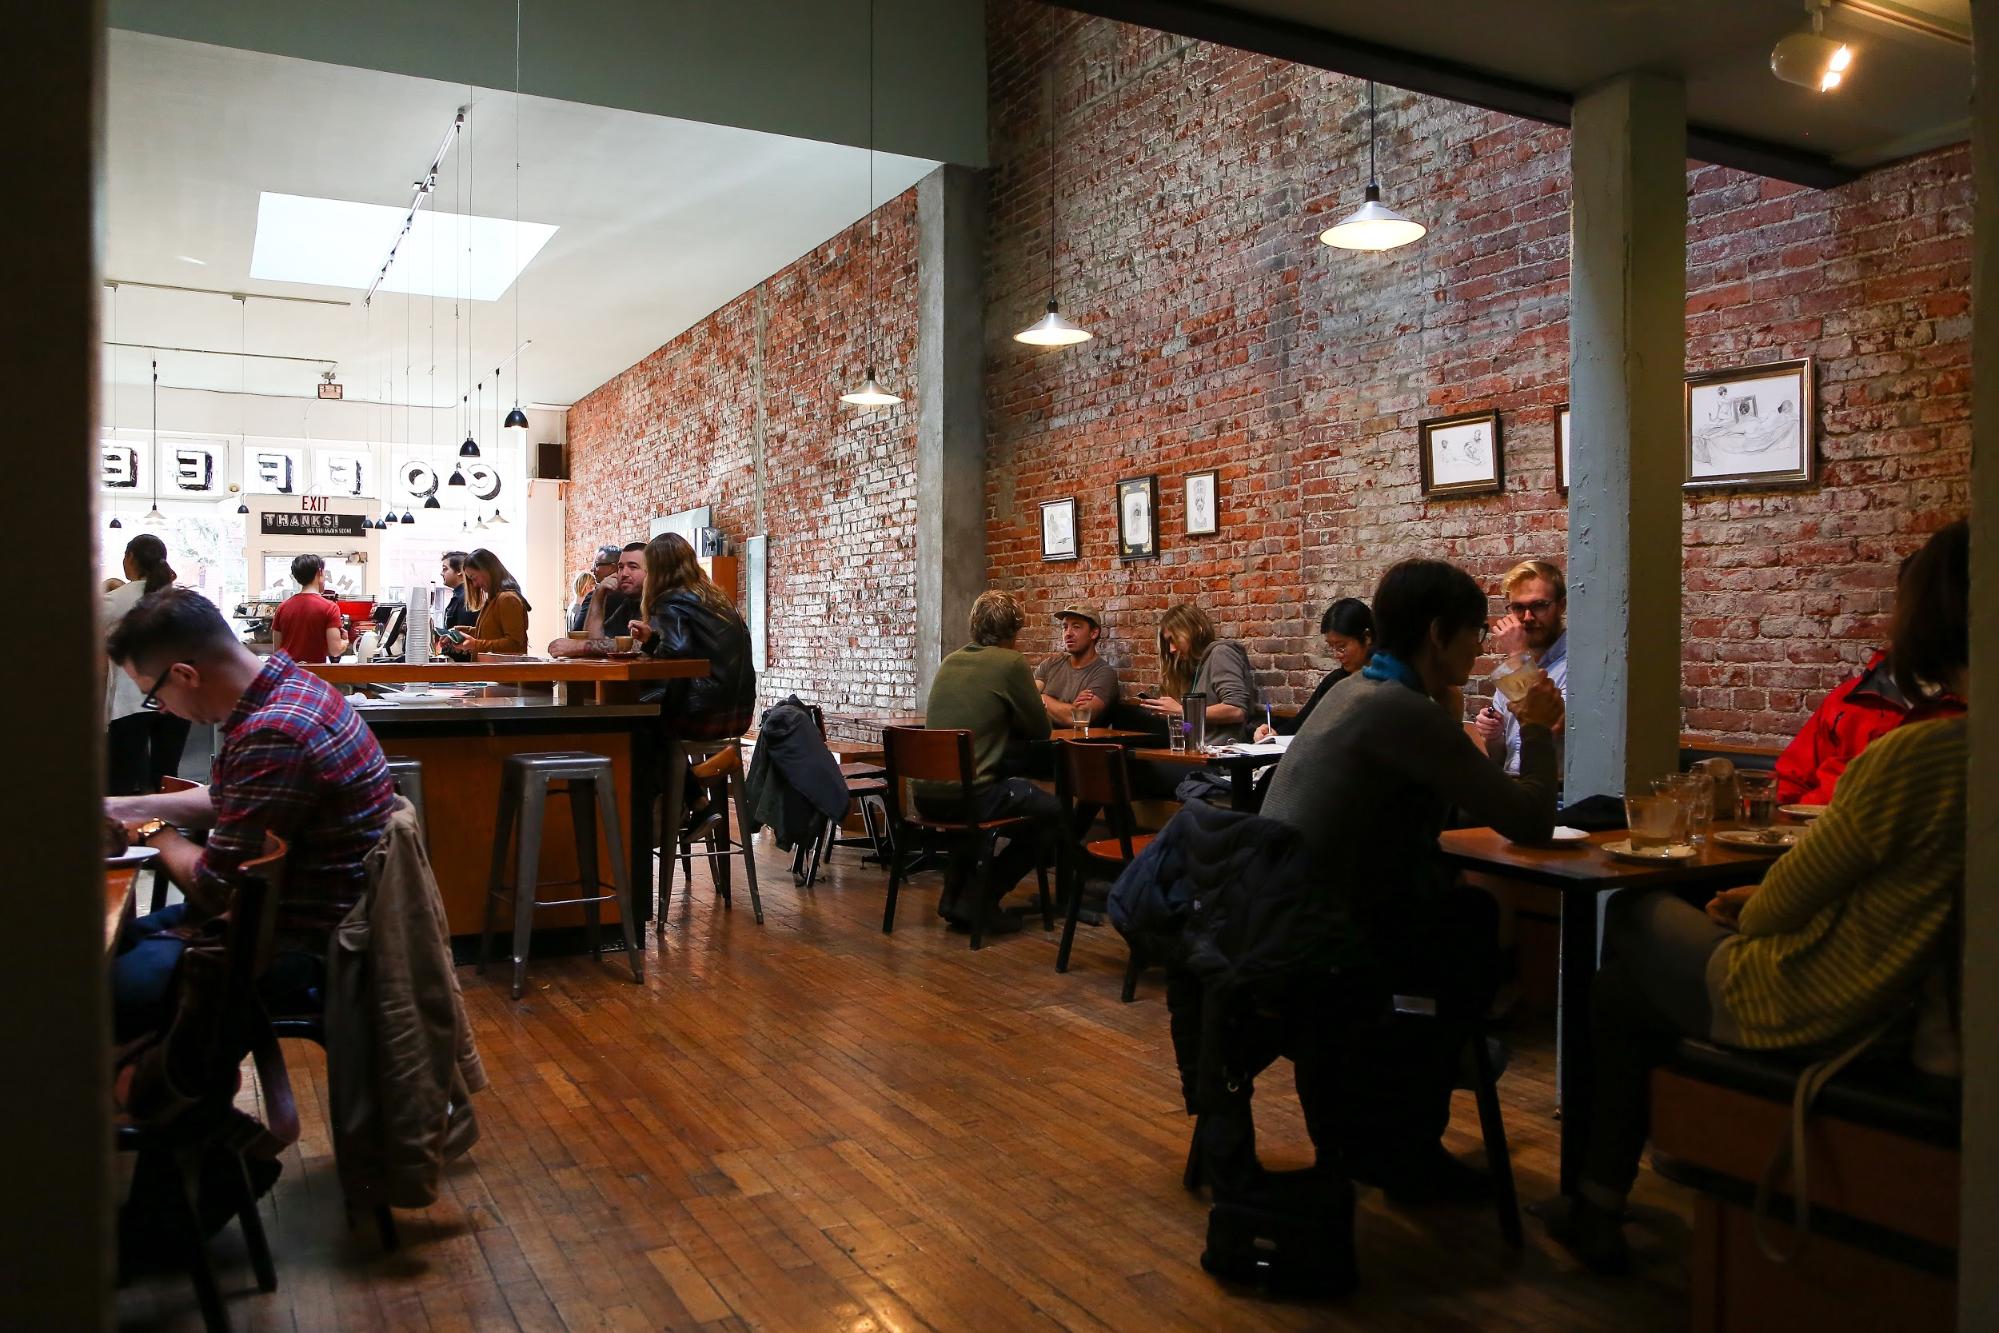 Diners sit in a modern coffee shop with brick walls.